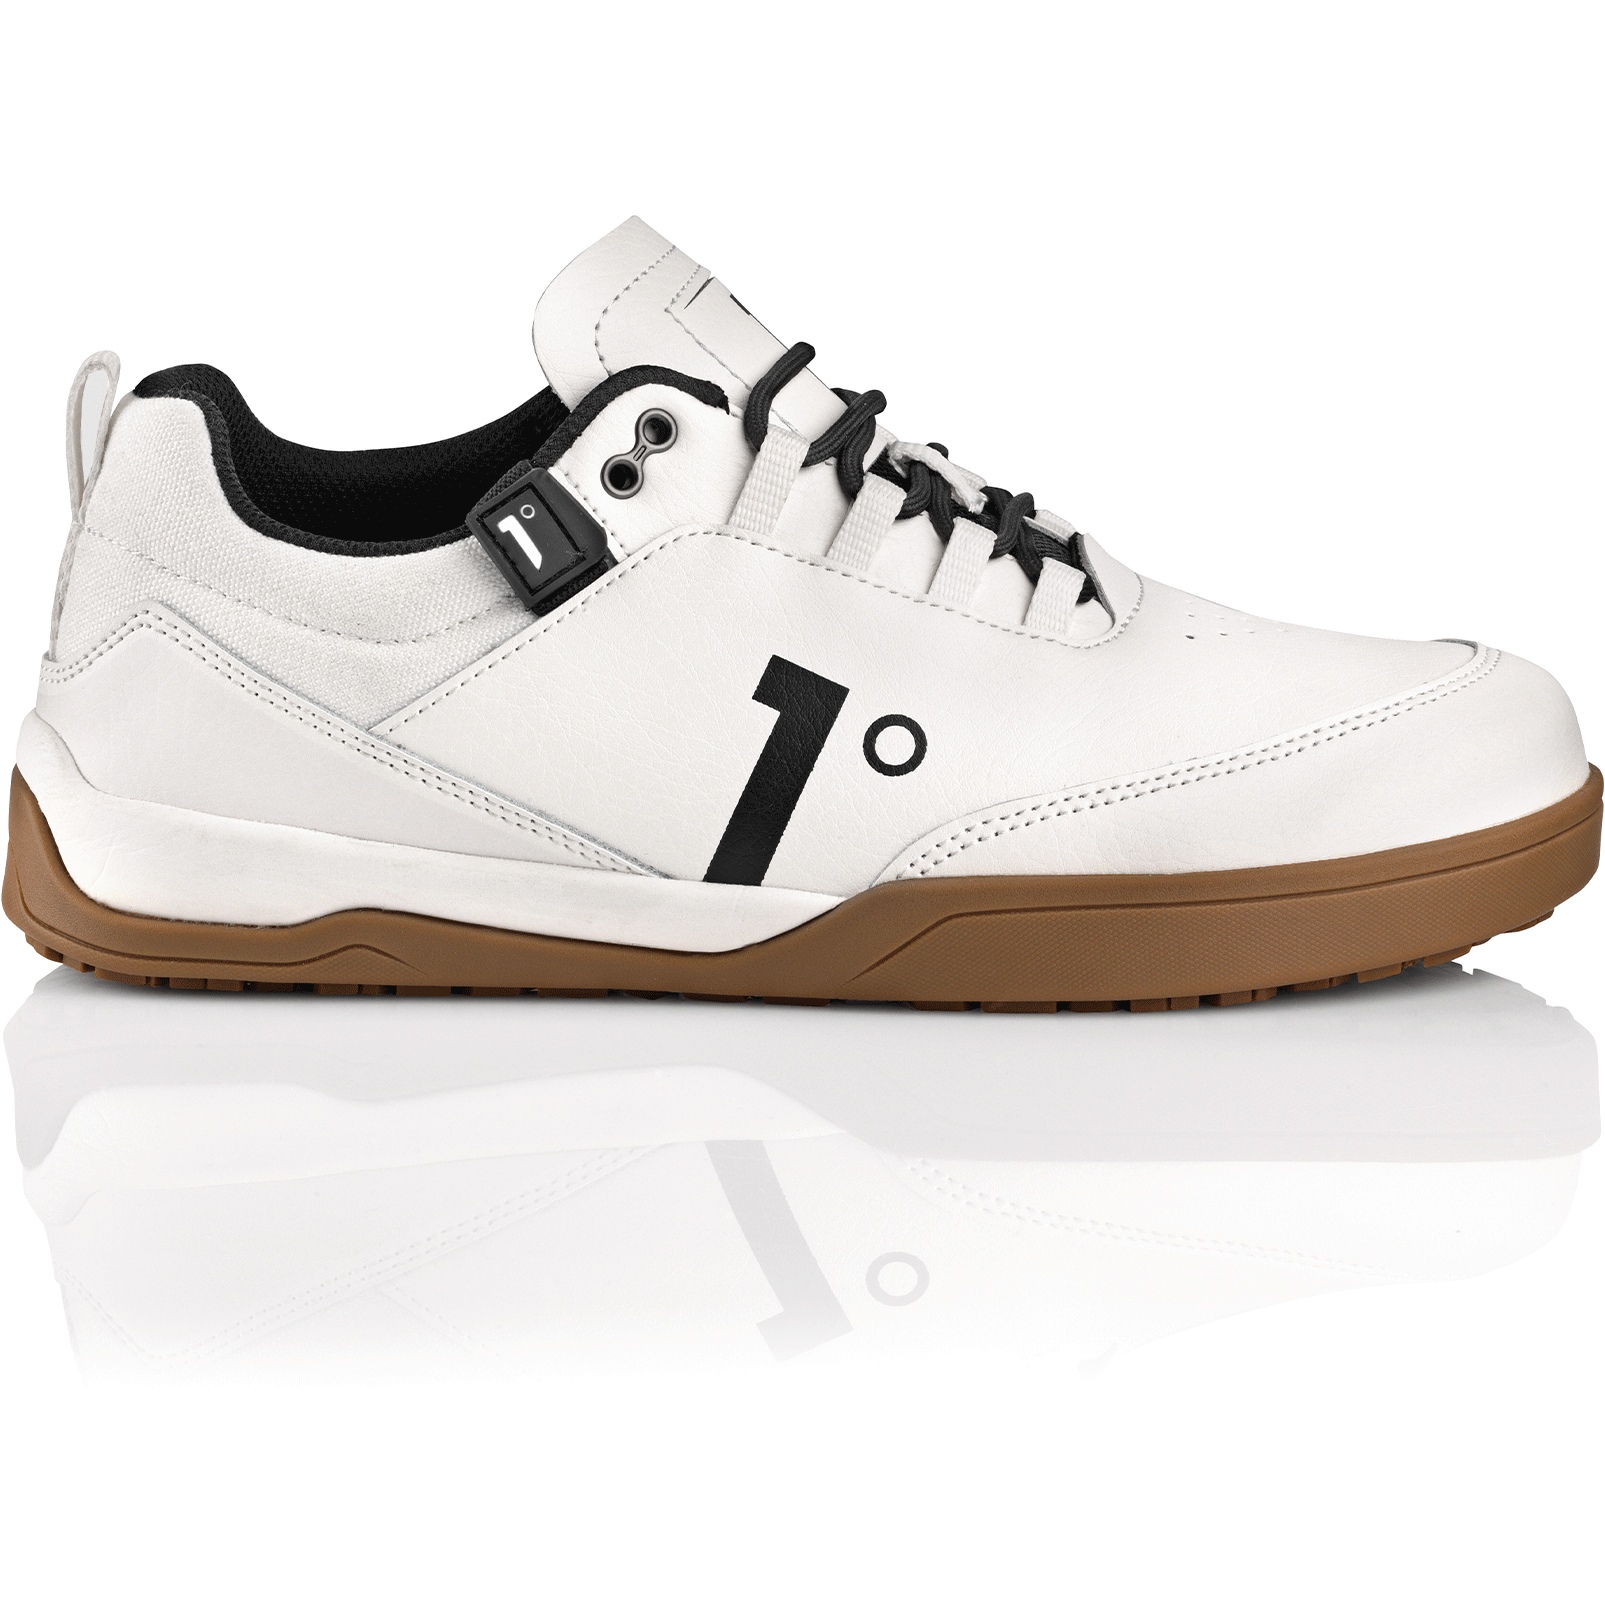 Picture of First Degree Flite XT MTB Shoes - white